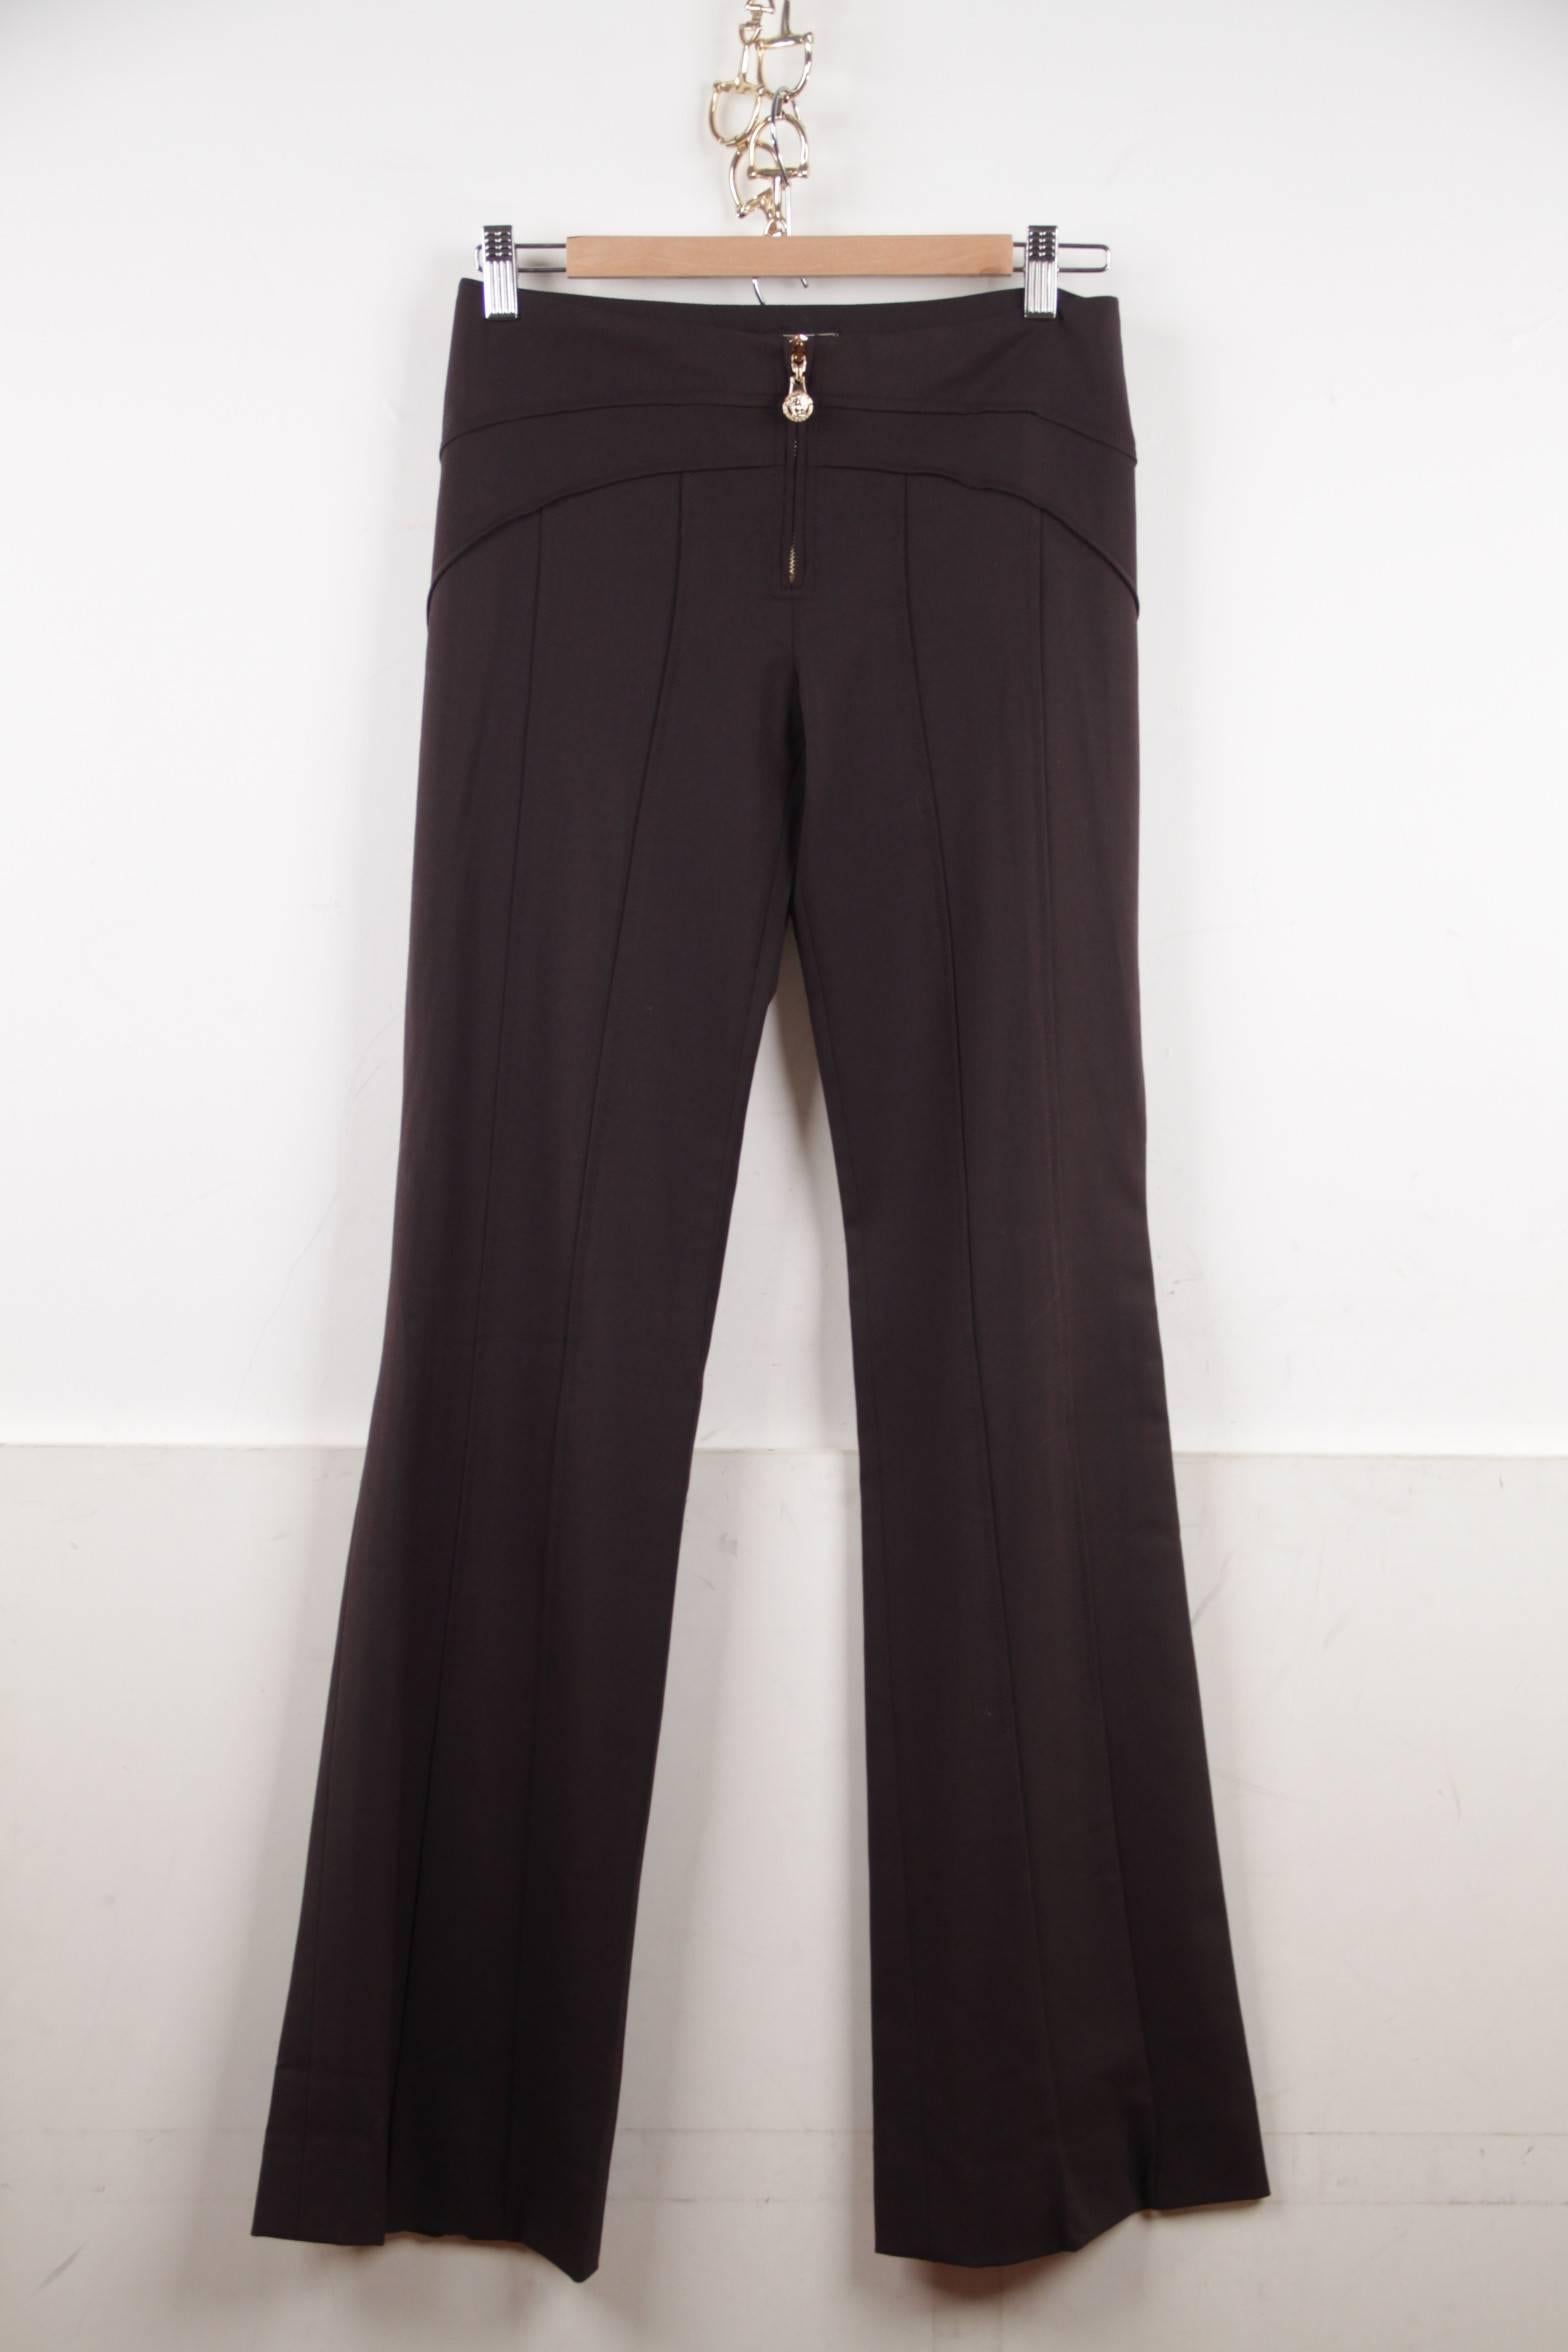 - Versace stretch wool trousers from the Fall 2005 collection
- Brown color with gold-tone stitchings
- Front zip closure with MEDUSA zipper pull
- Composition:95% wool, 4% elastane
- Lining: Unlined
- Size : 40 IT (The size shown for this item